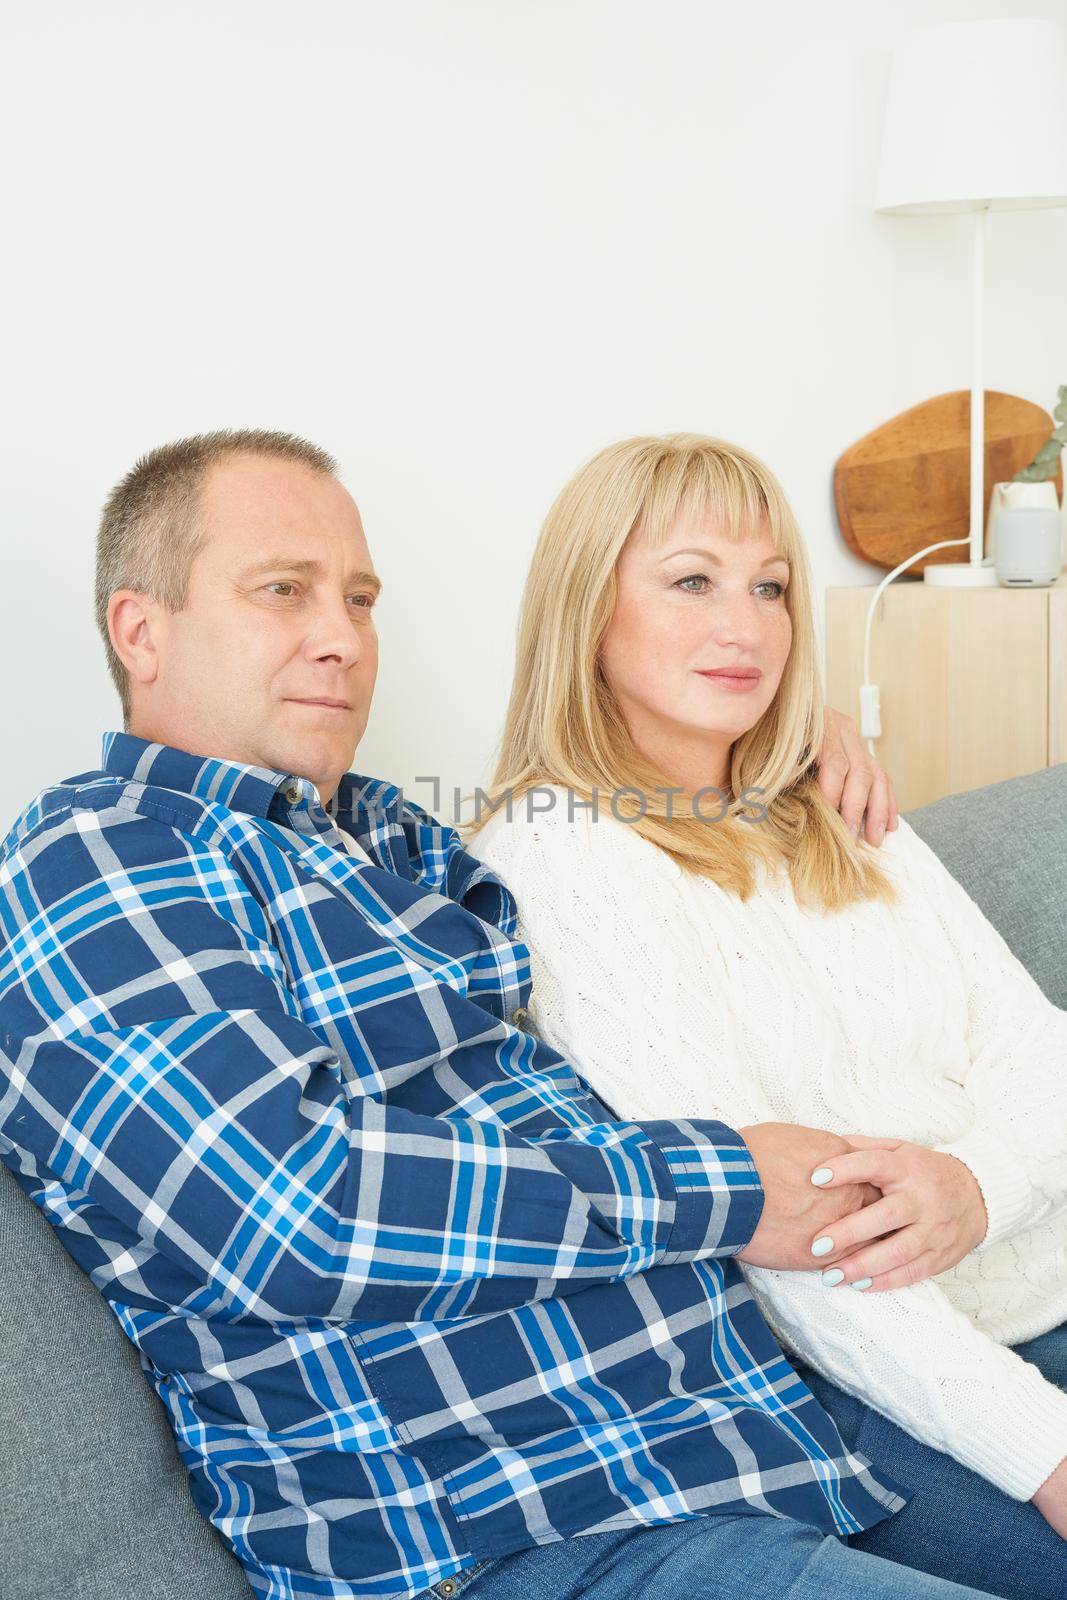 Waist portrait of mature couple in home interior on sofa. Handsome man and middle age woman by NataBene